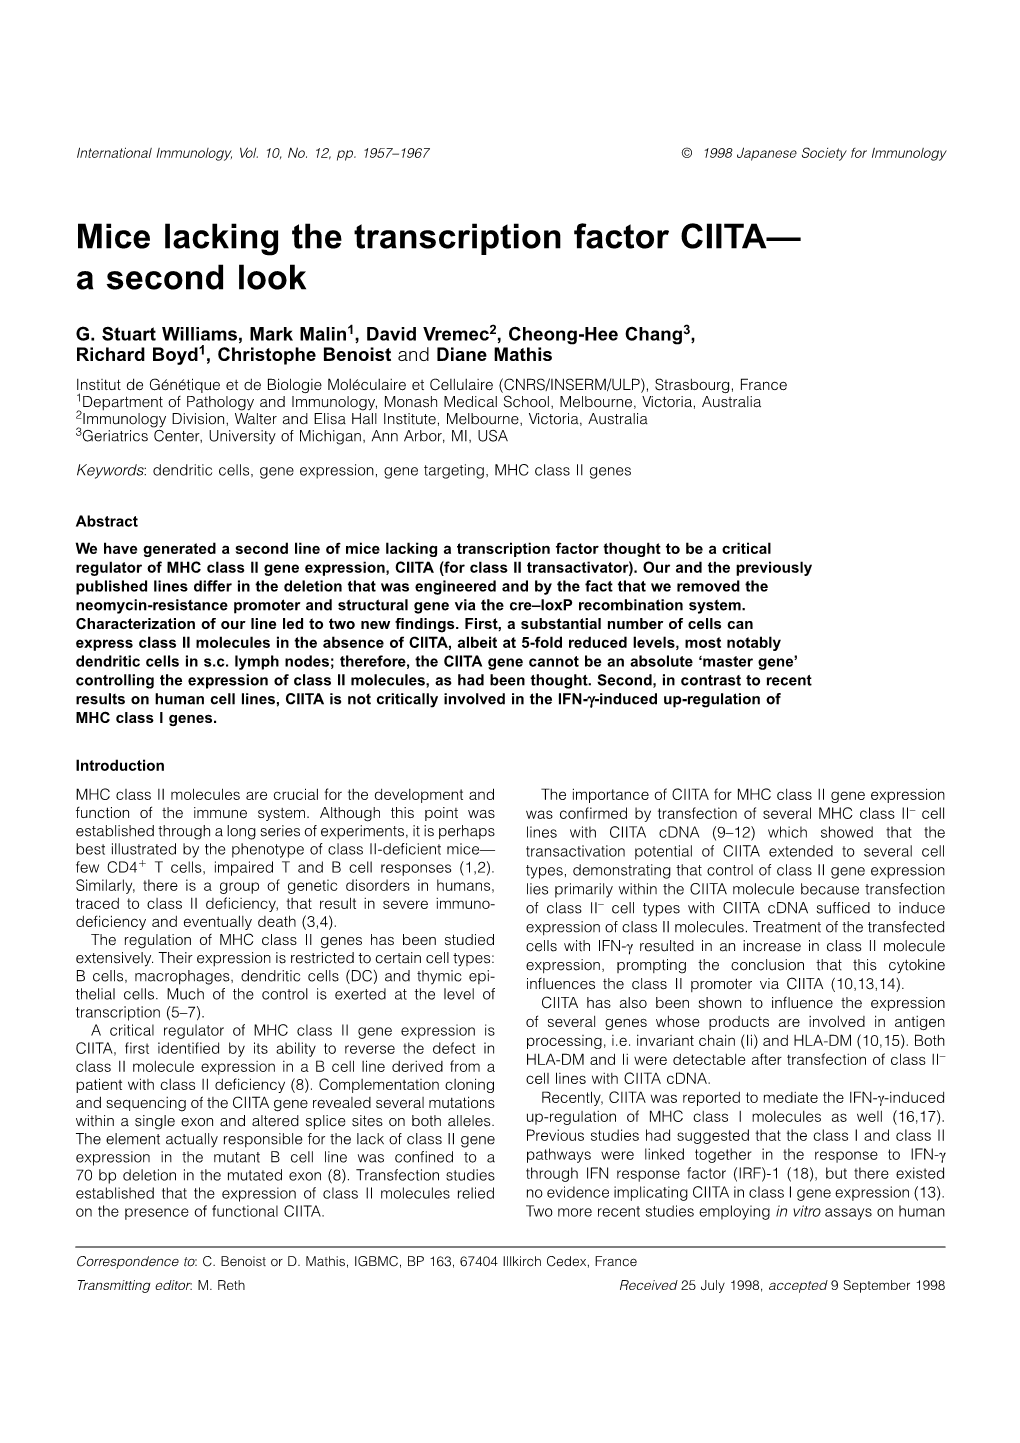 Mice Lacking the Transcription Factor CIITA— a Second Look